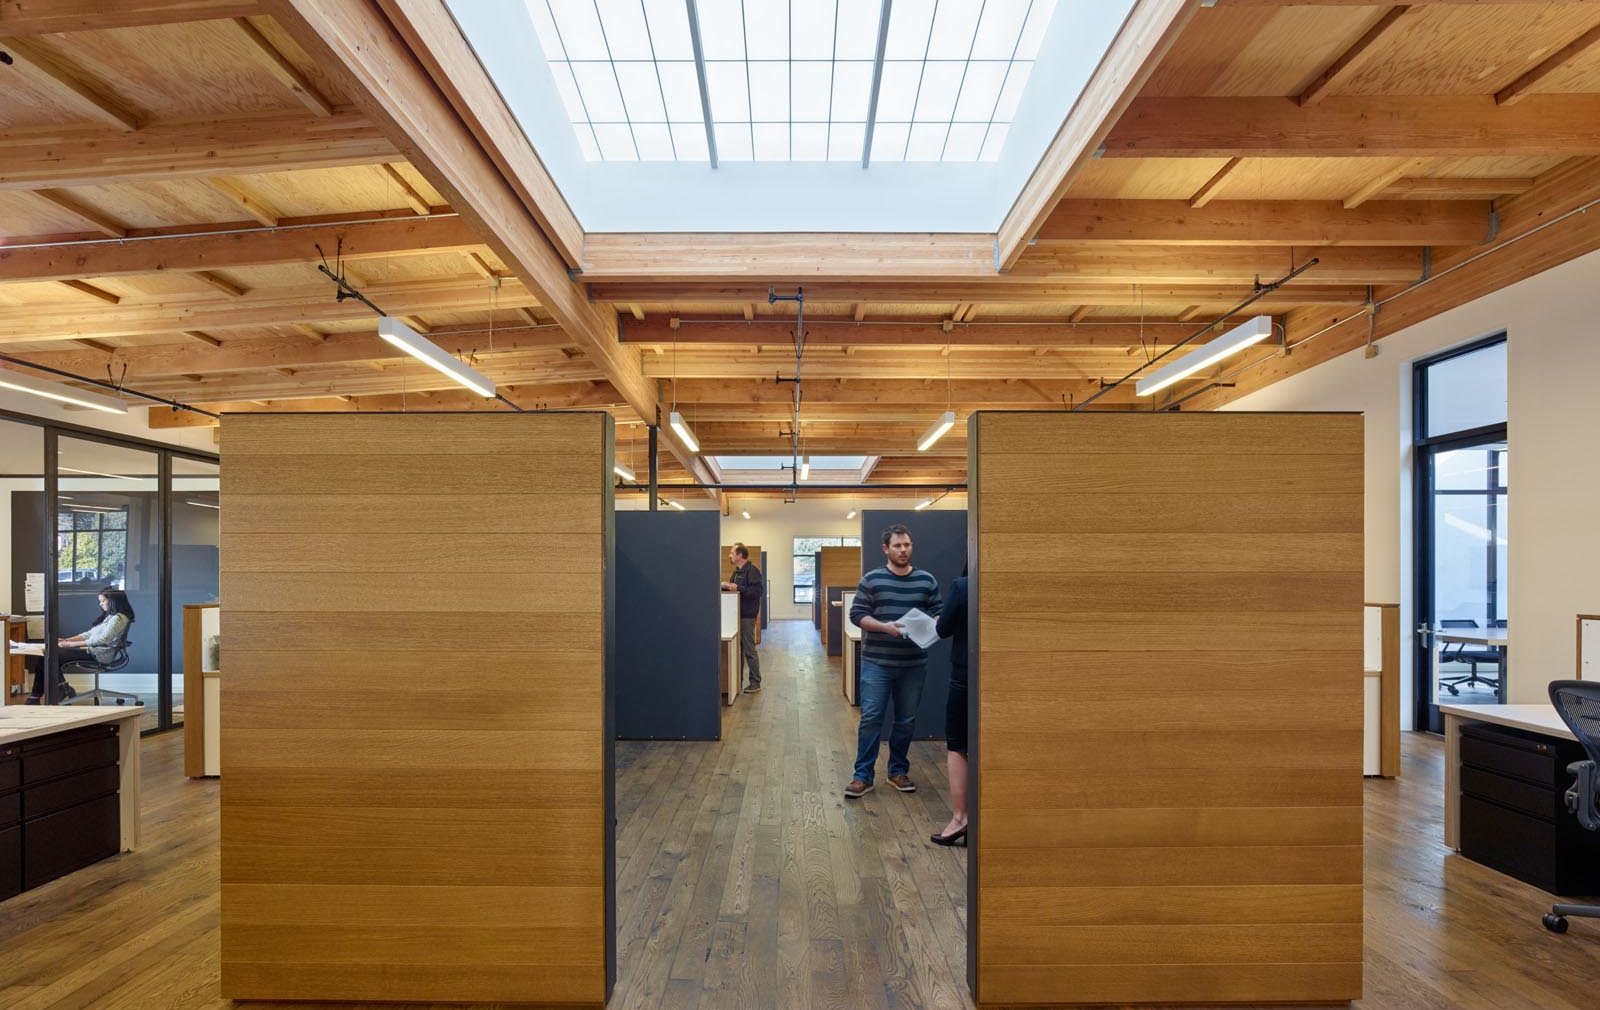 1060 Redwood office building interior with people standing among wooden walls, desks, and Kalwall translucent skylights above